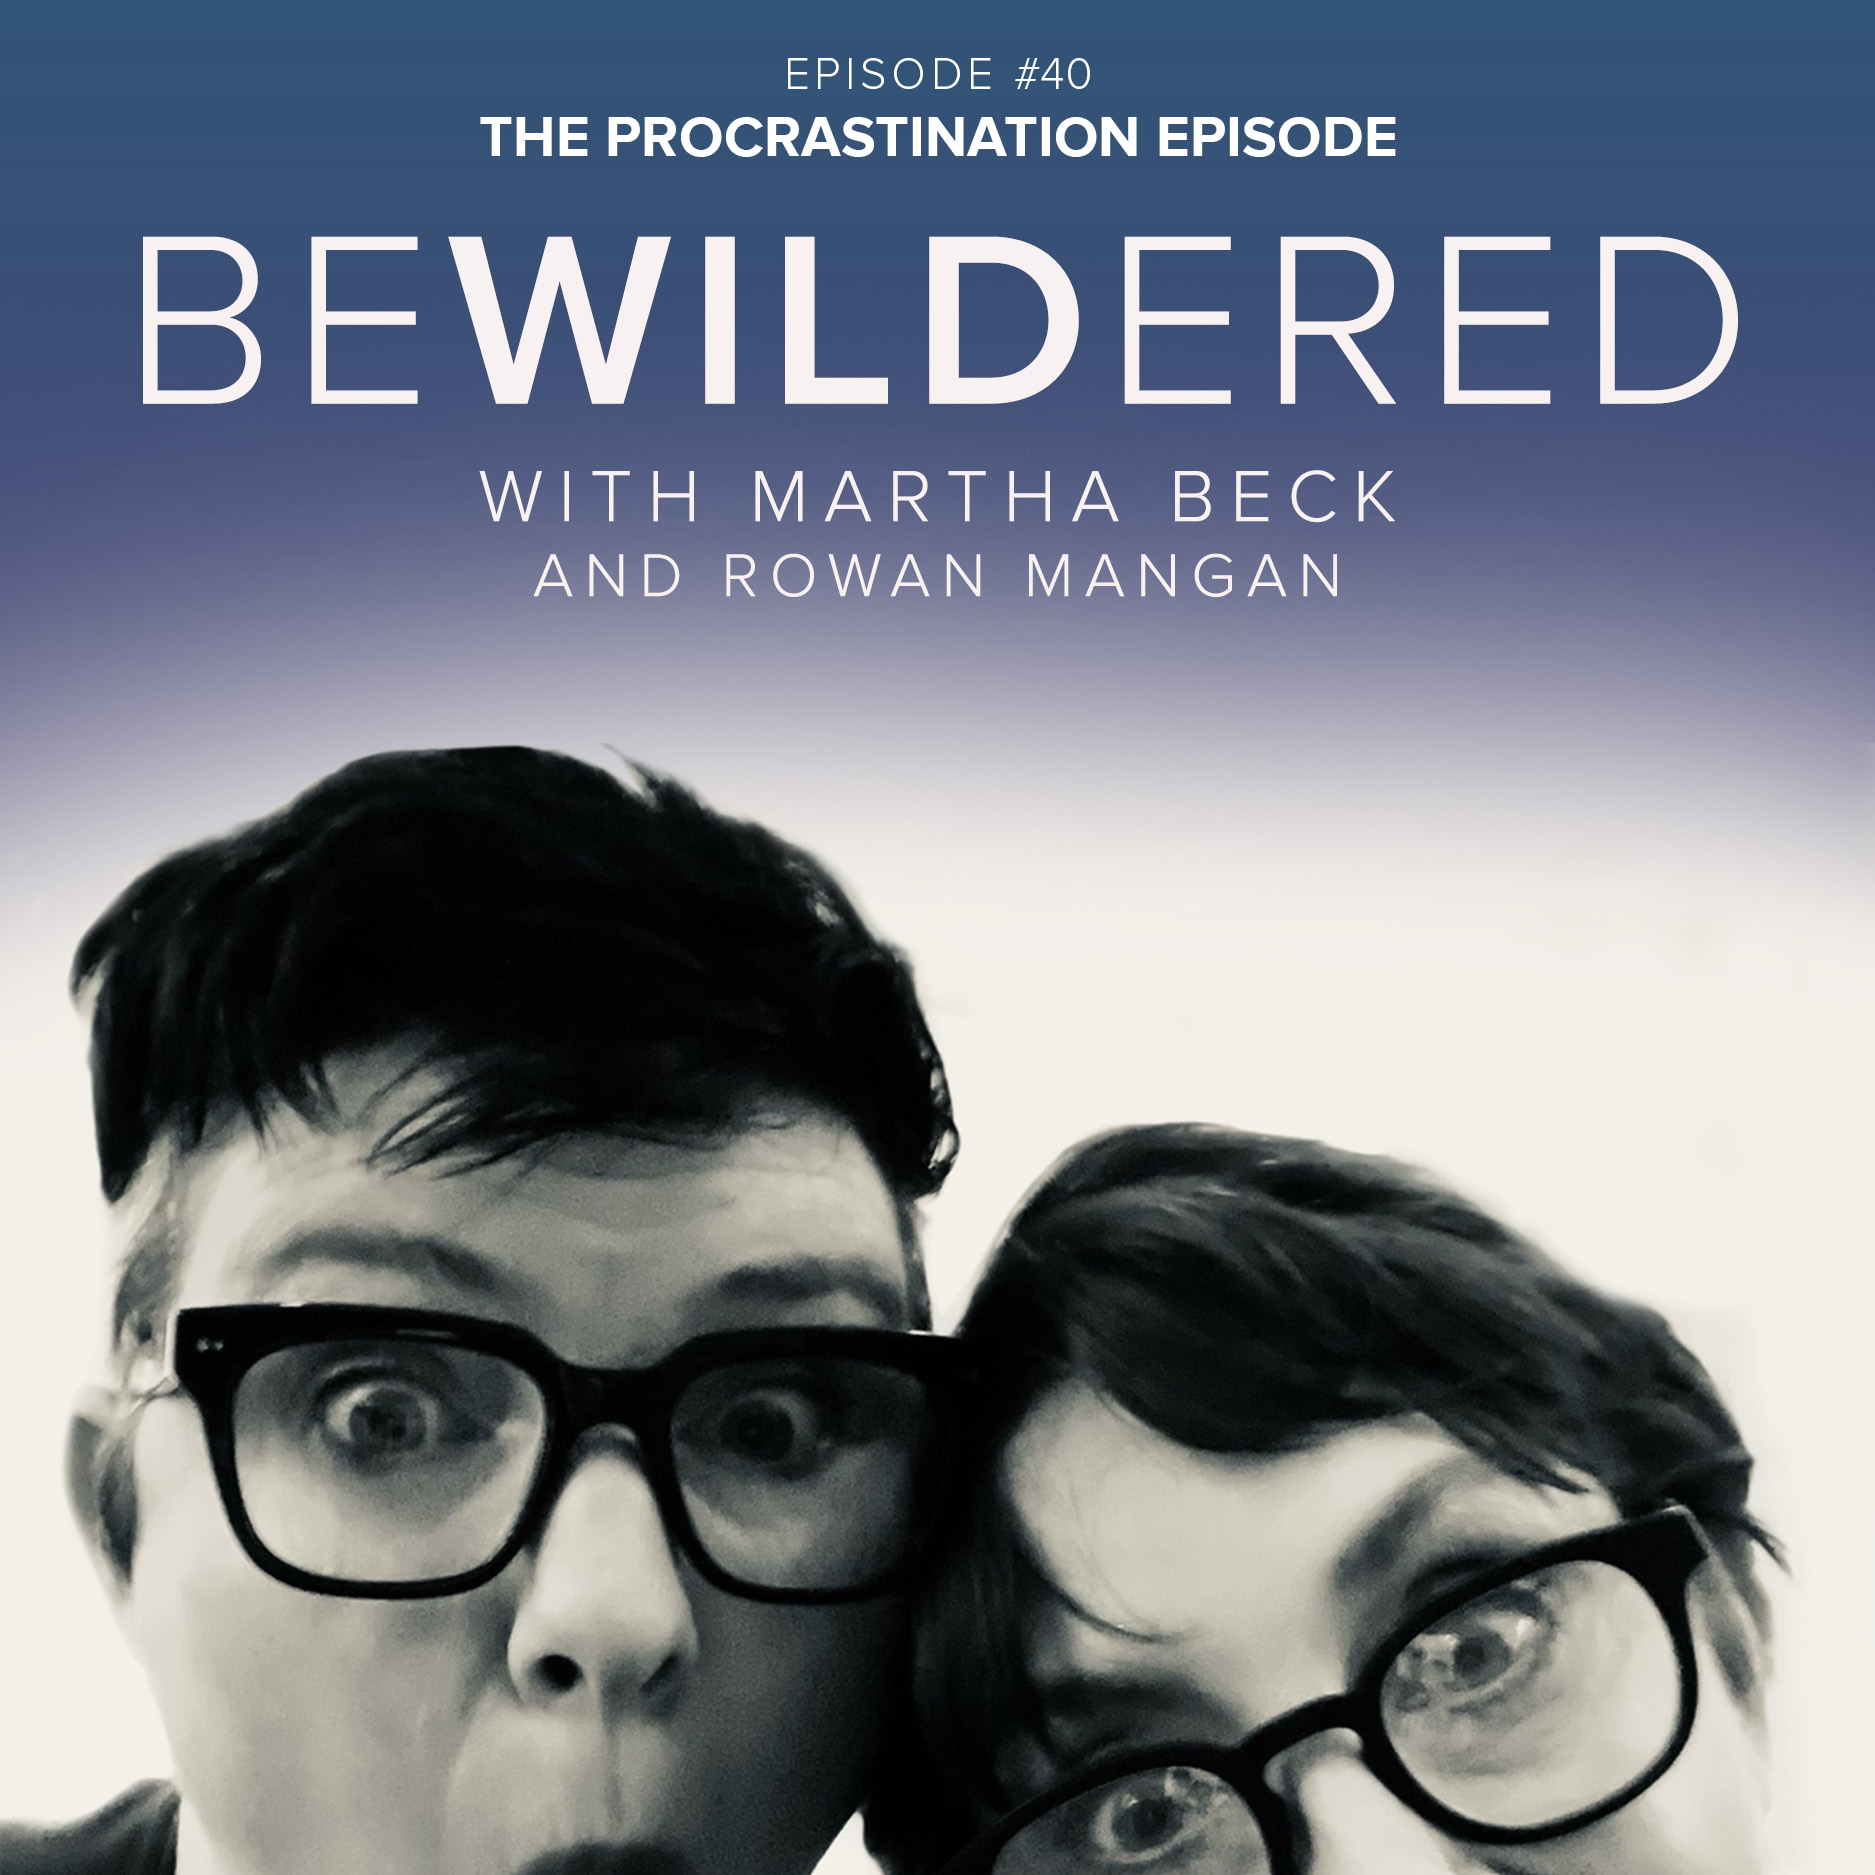 Image for Episode #40 The Procrastination Episode for the Bewildered Podcast with Martha Beck and Rowan Mangan